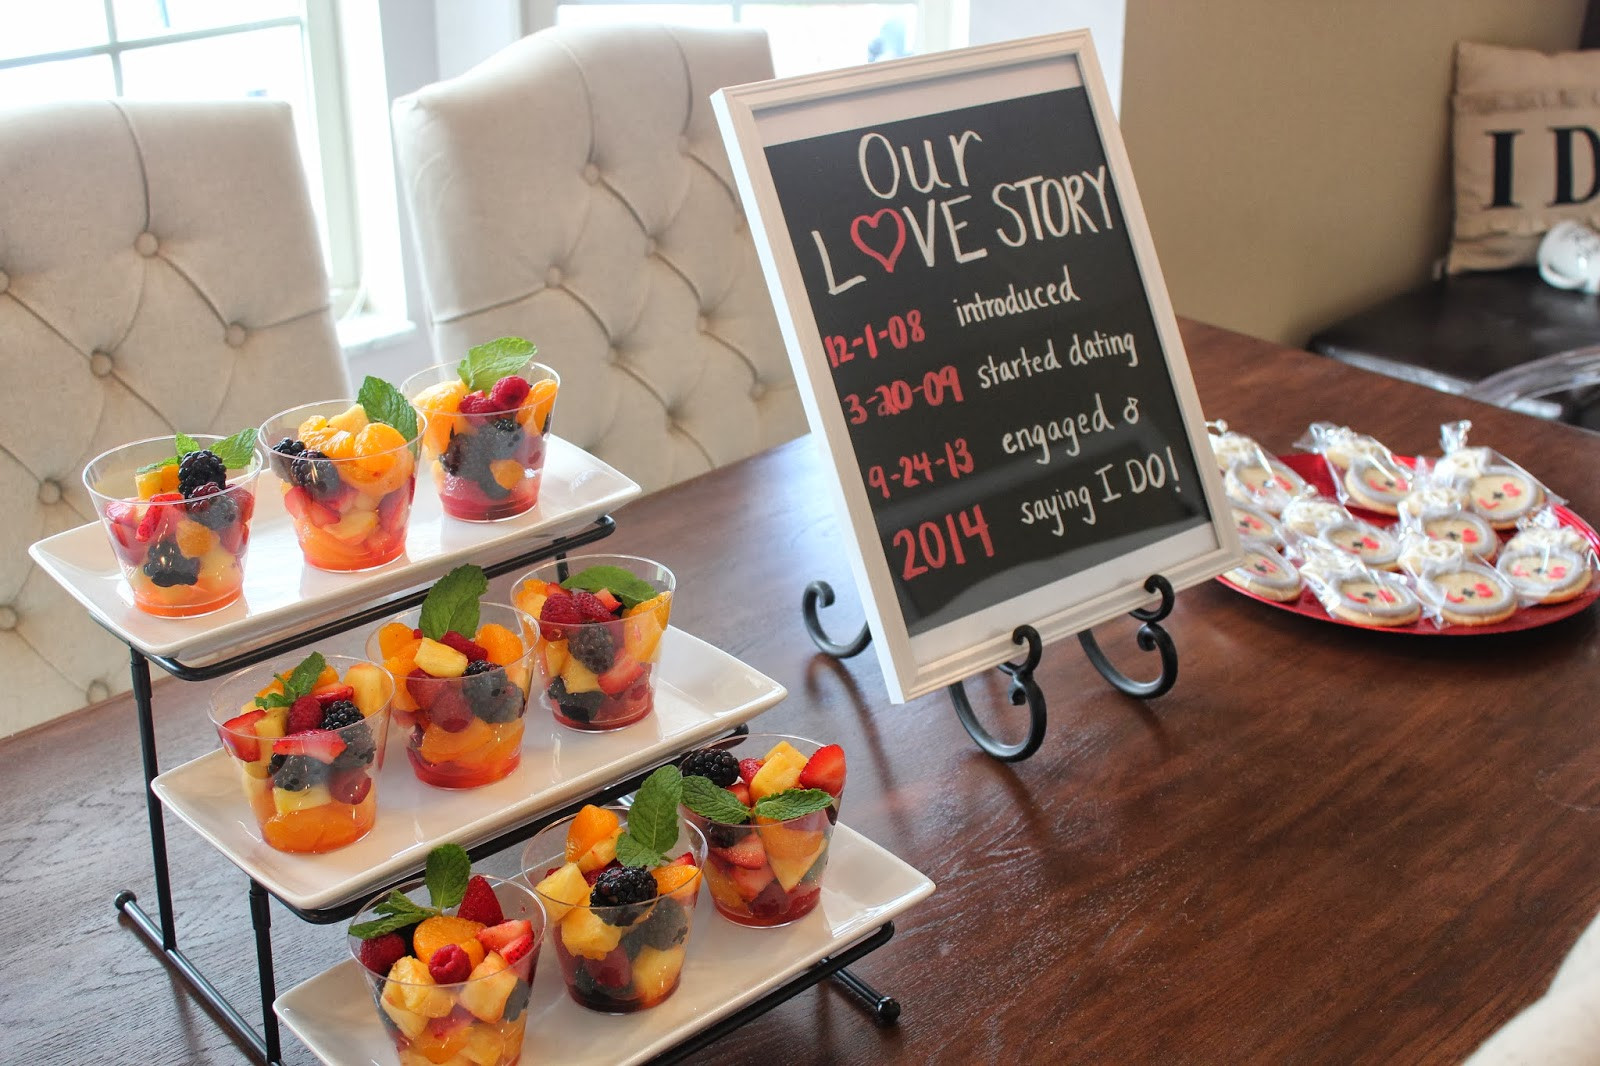 Food Ideas For Engagement Party At Home
 KEEP CALM AND CARRY ON My Best Friend s Engagement Party